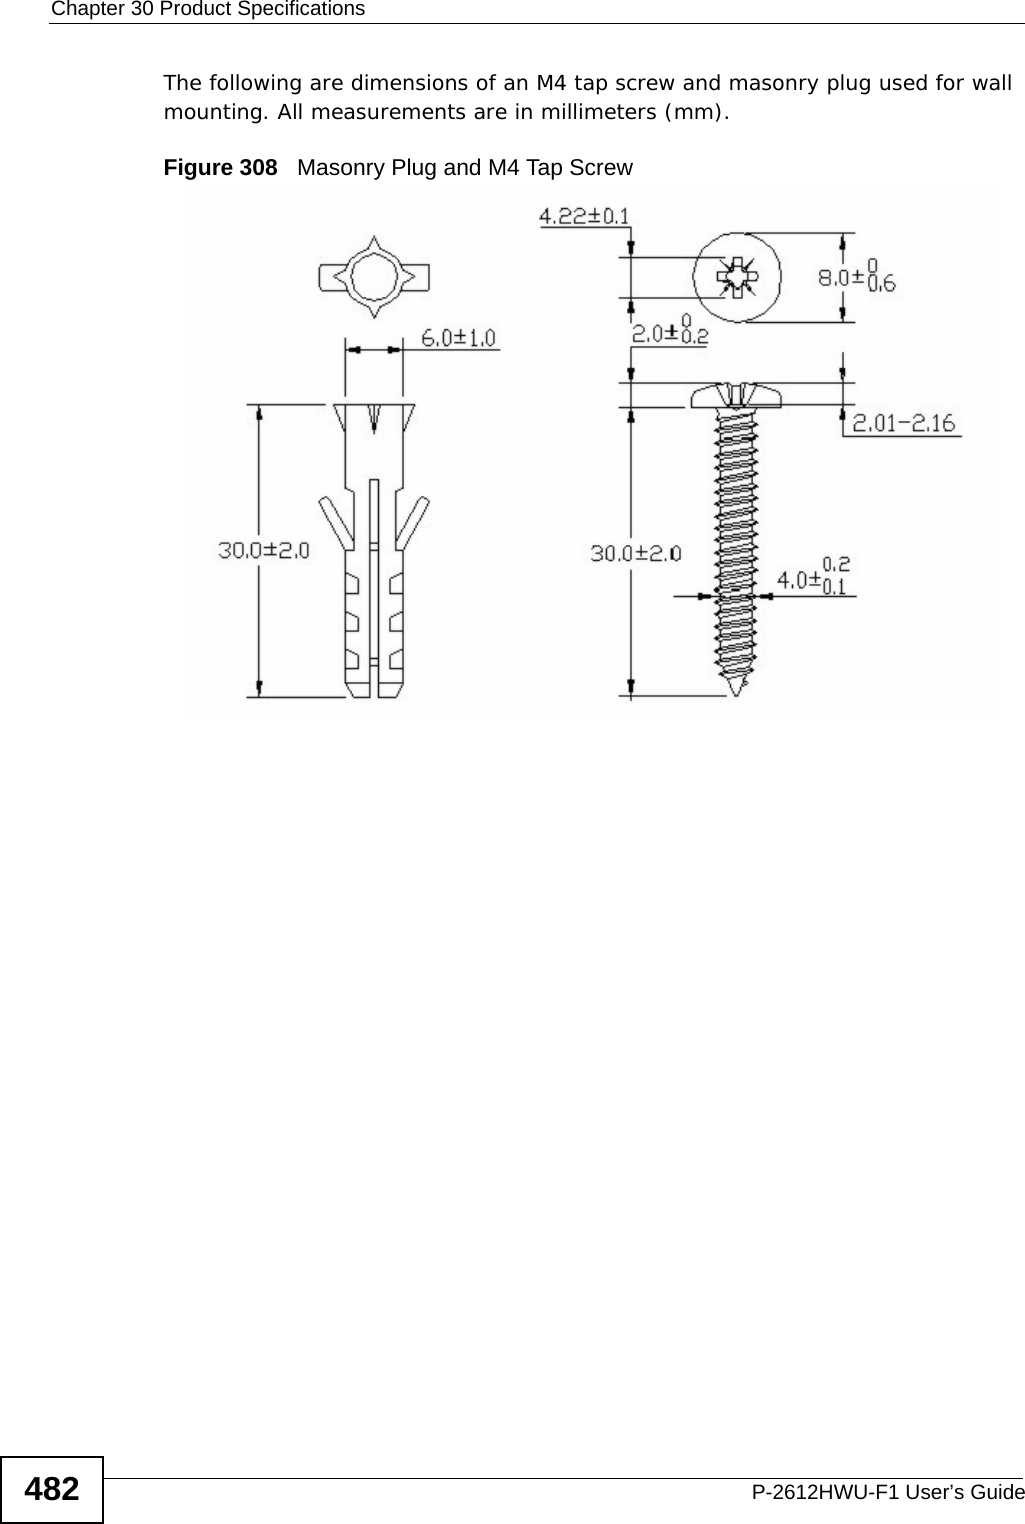 Chapter 30 Product SpecificationsP-2612HWU-F1 User’s Guide482The following are dimensions of an M4 tap screw and masonry plug used for wall mounting. All measurements are in millimeters (mm). Figure 308   Masonry Plug and M4 Tap Screw